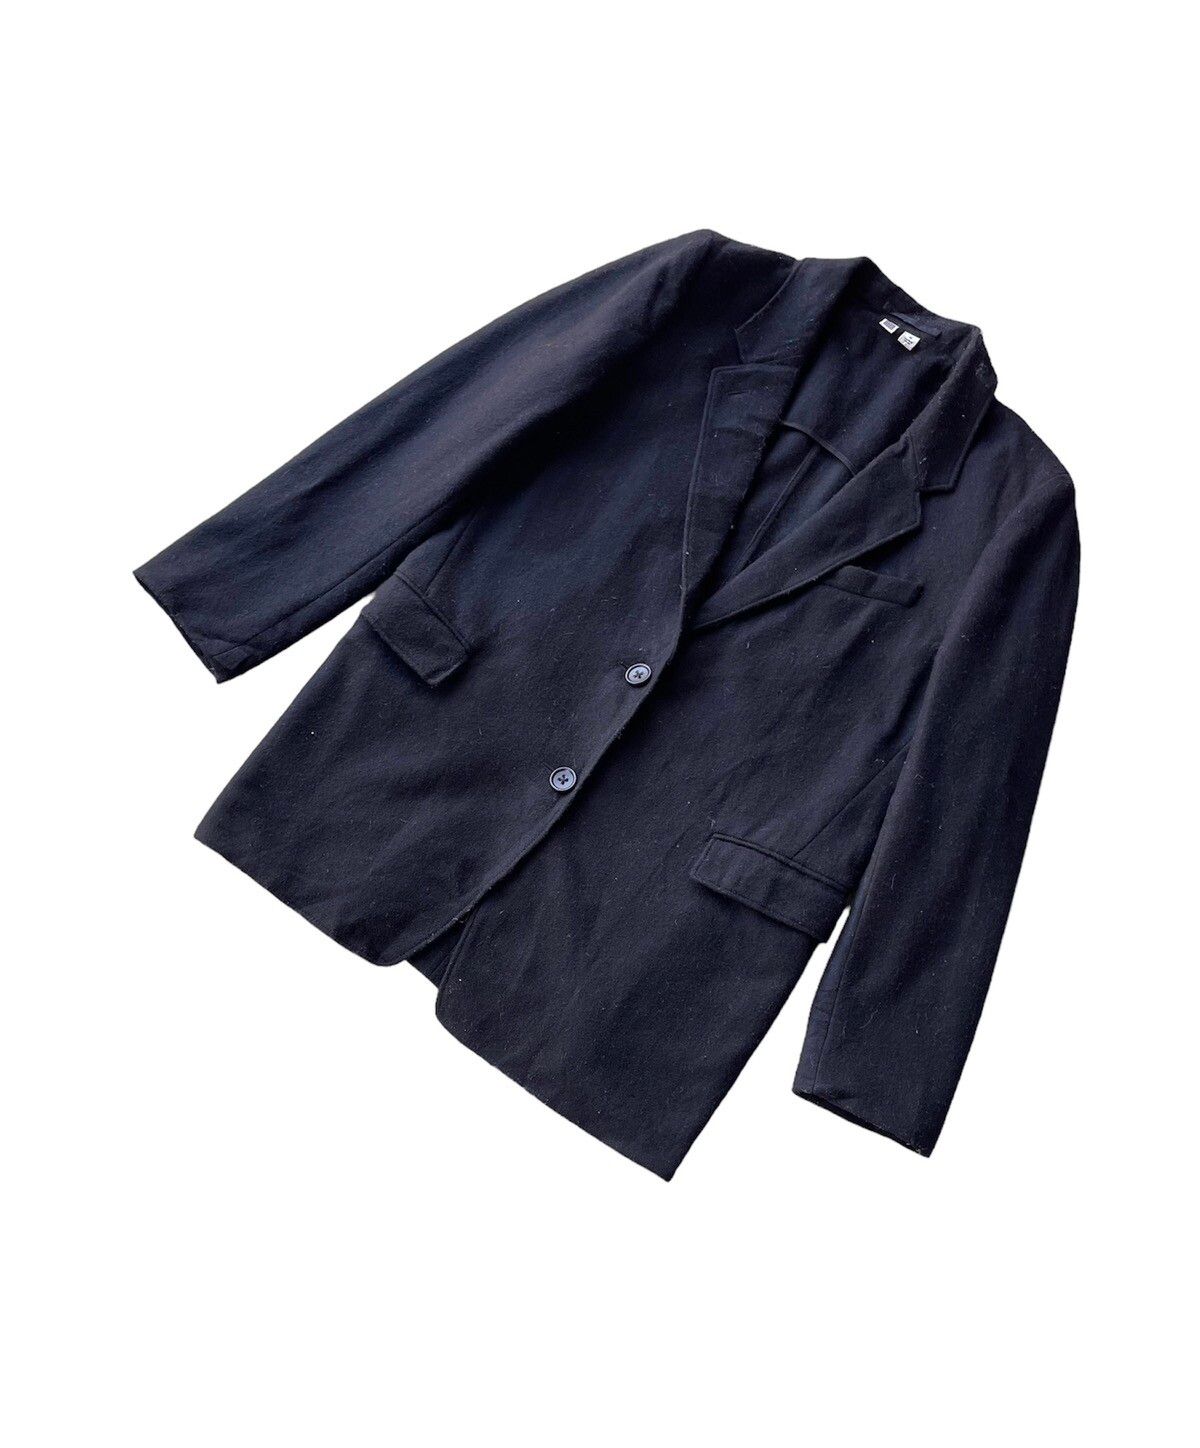 UNIQLO UNDERCOVER WOOL SUIT JACKET - 5